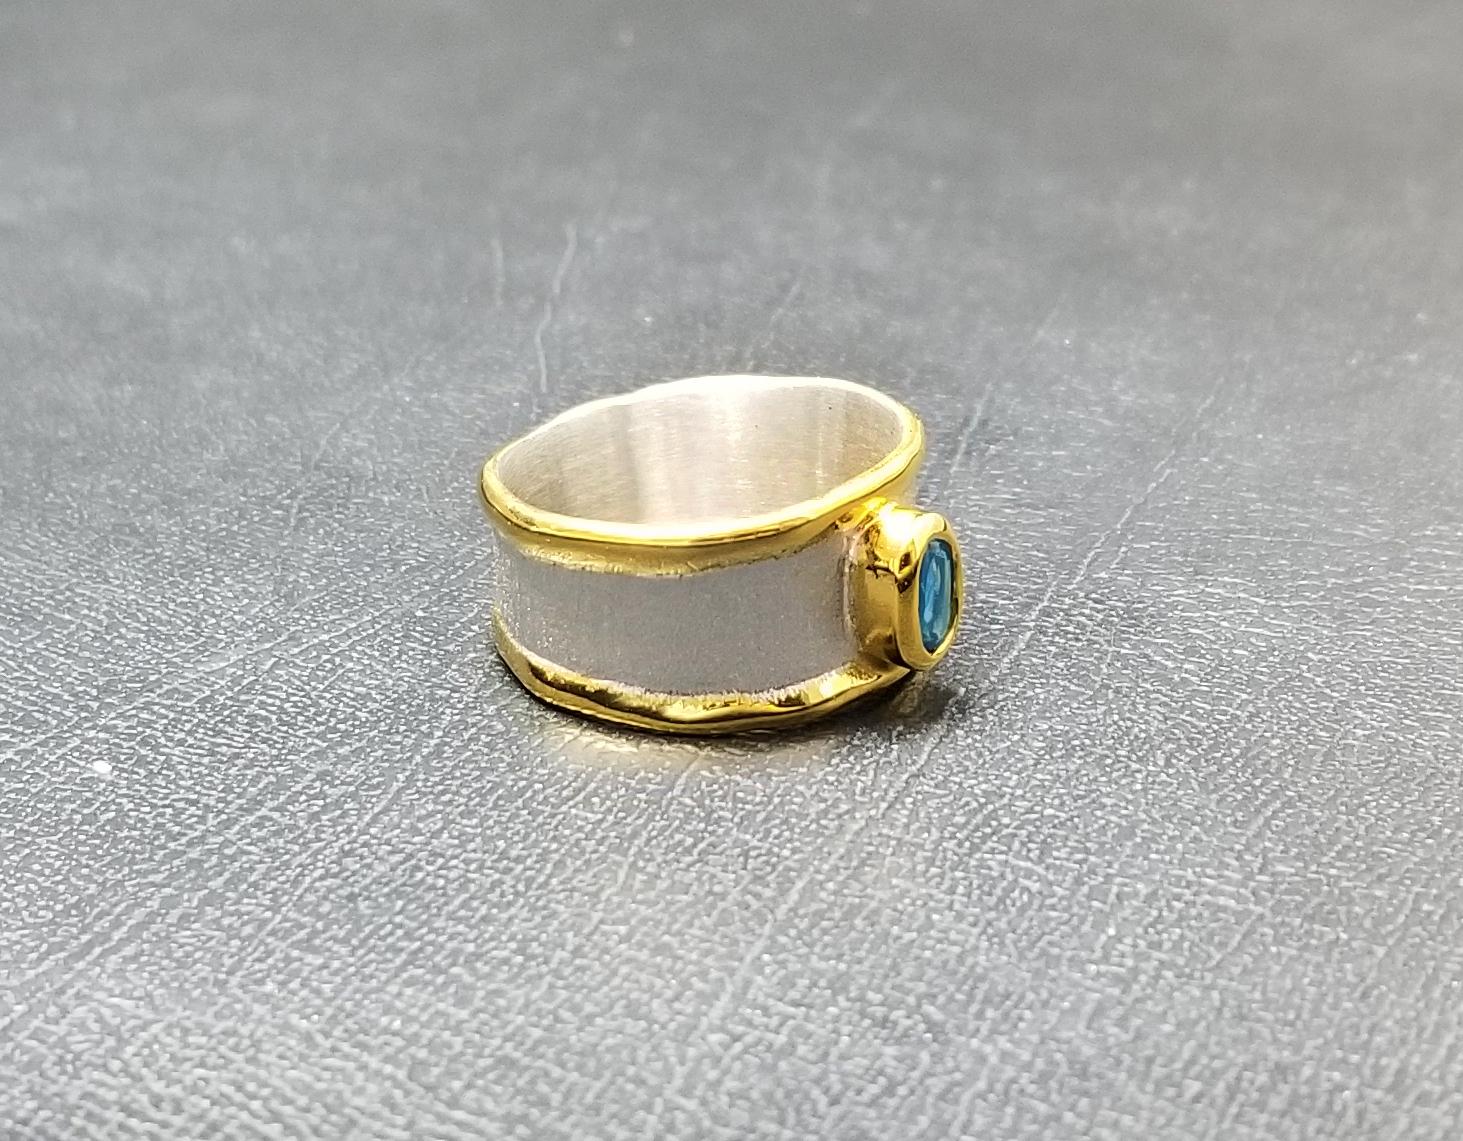 Yianni Creations Midas Collection fully handmade artisan band ring made from a fine silver plated with platinum and decorated with a thick overlay of 24 Karat yellow gold. This gorgeous band features 0.57 Carat oval-shape London blue topaz. 
Contact